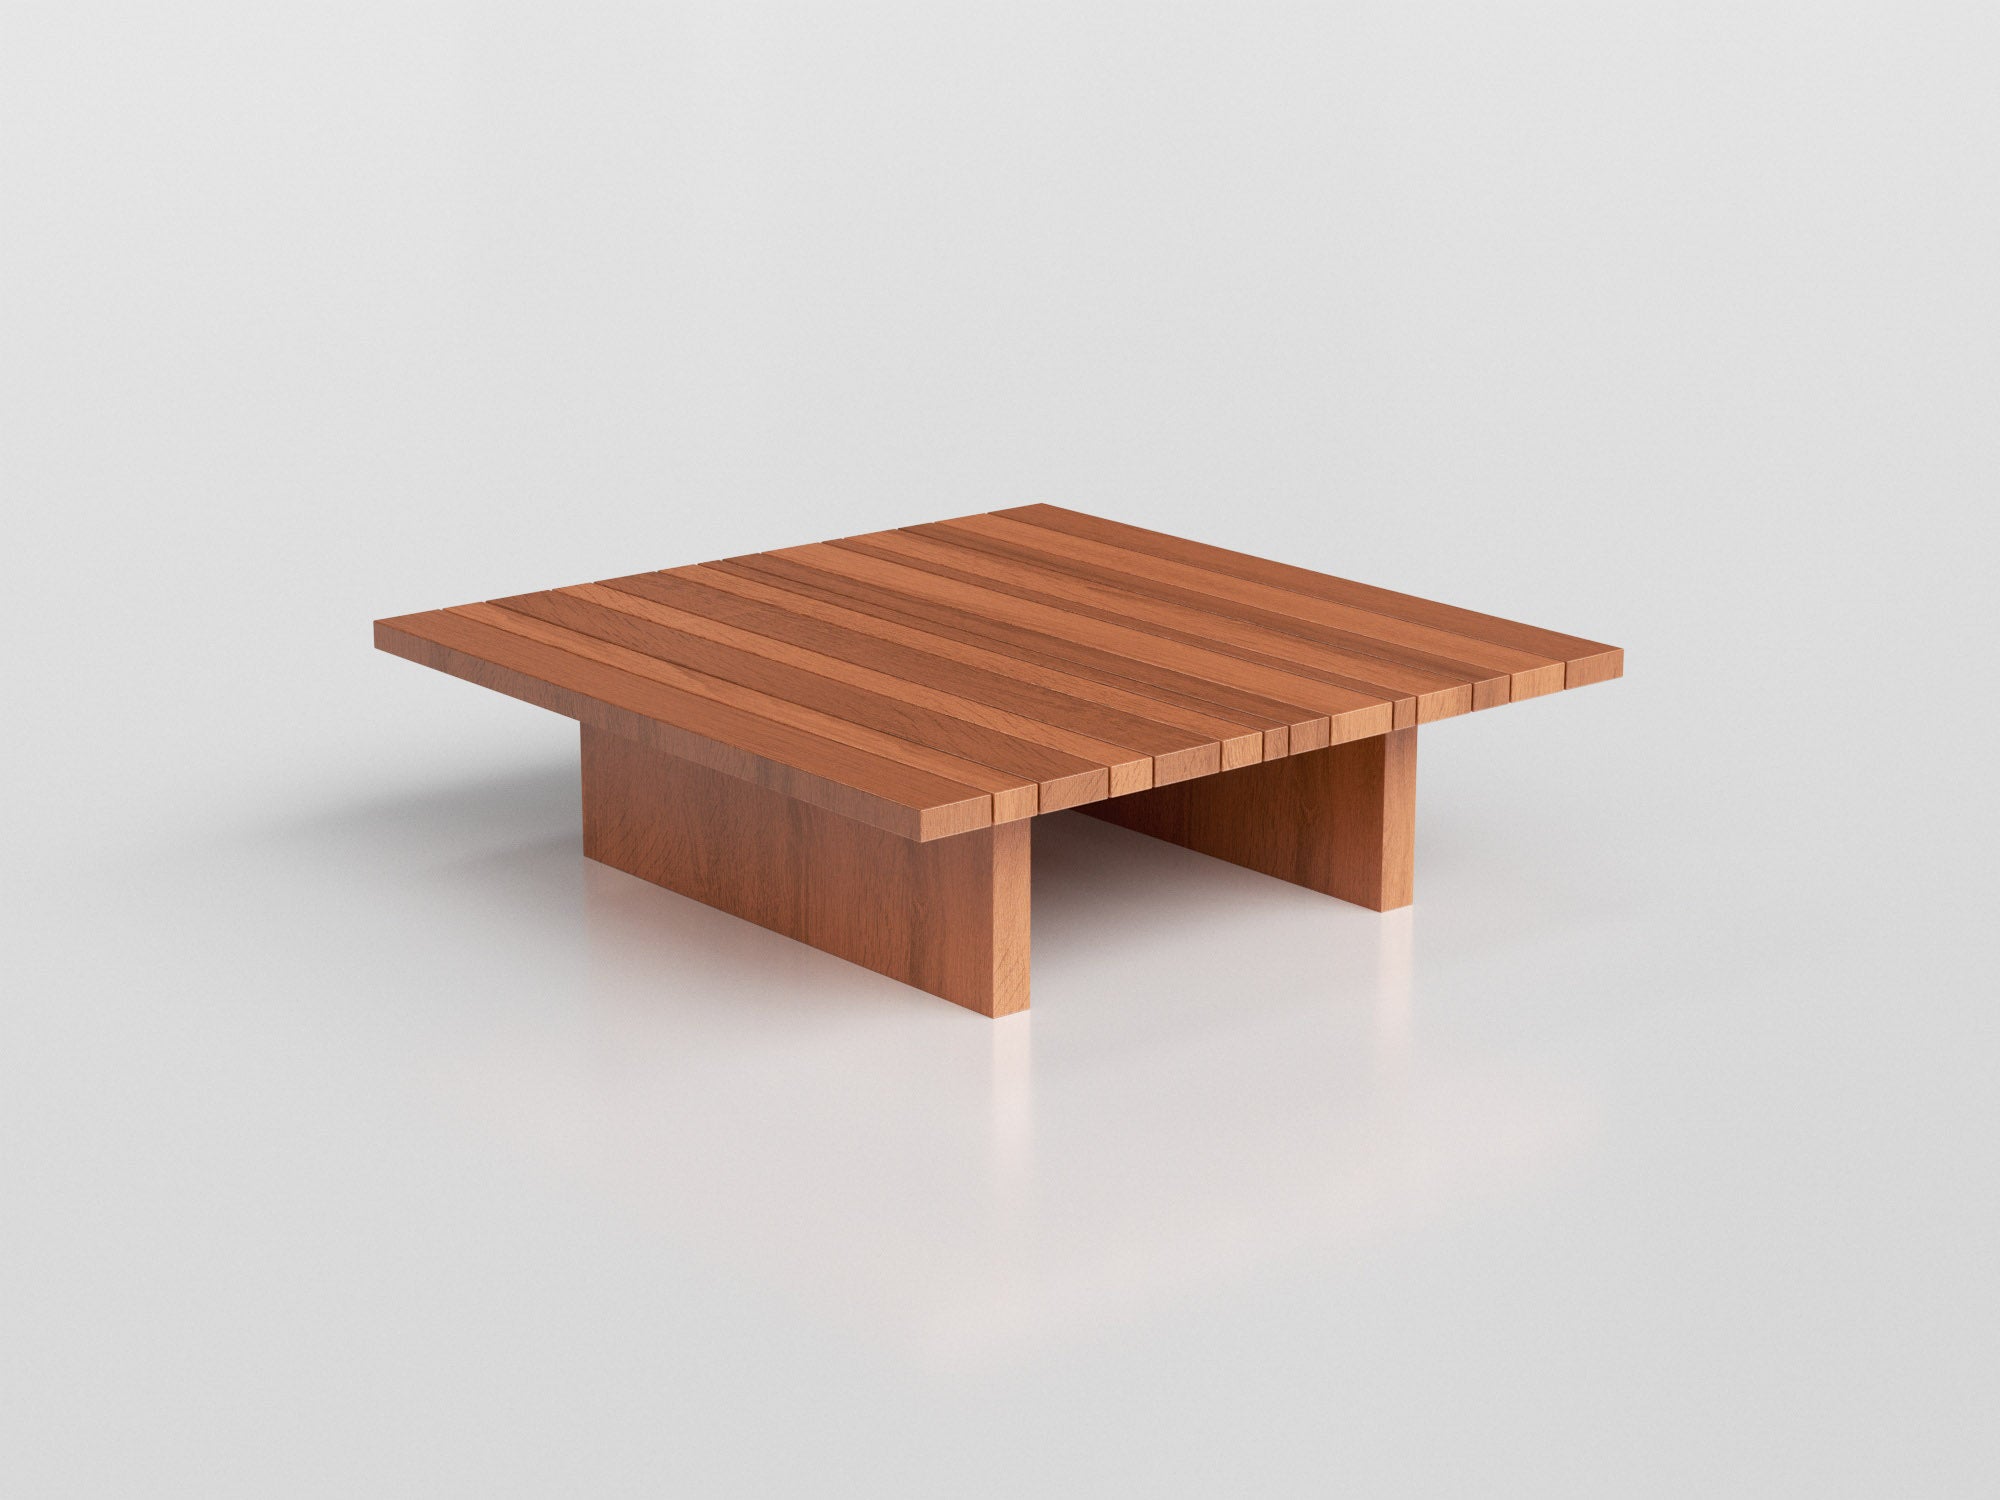 Fusion Square Coffee Table with wood estruture and top for outdoor areas, designed by Maria Candida Machado